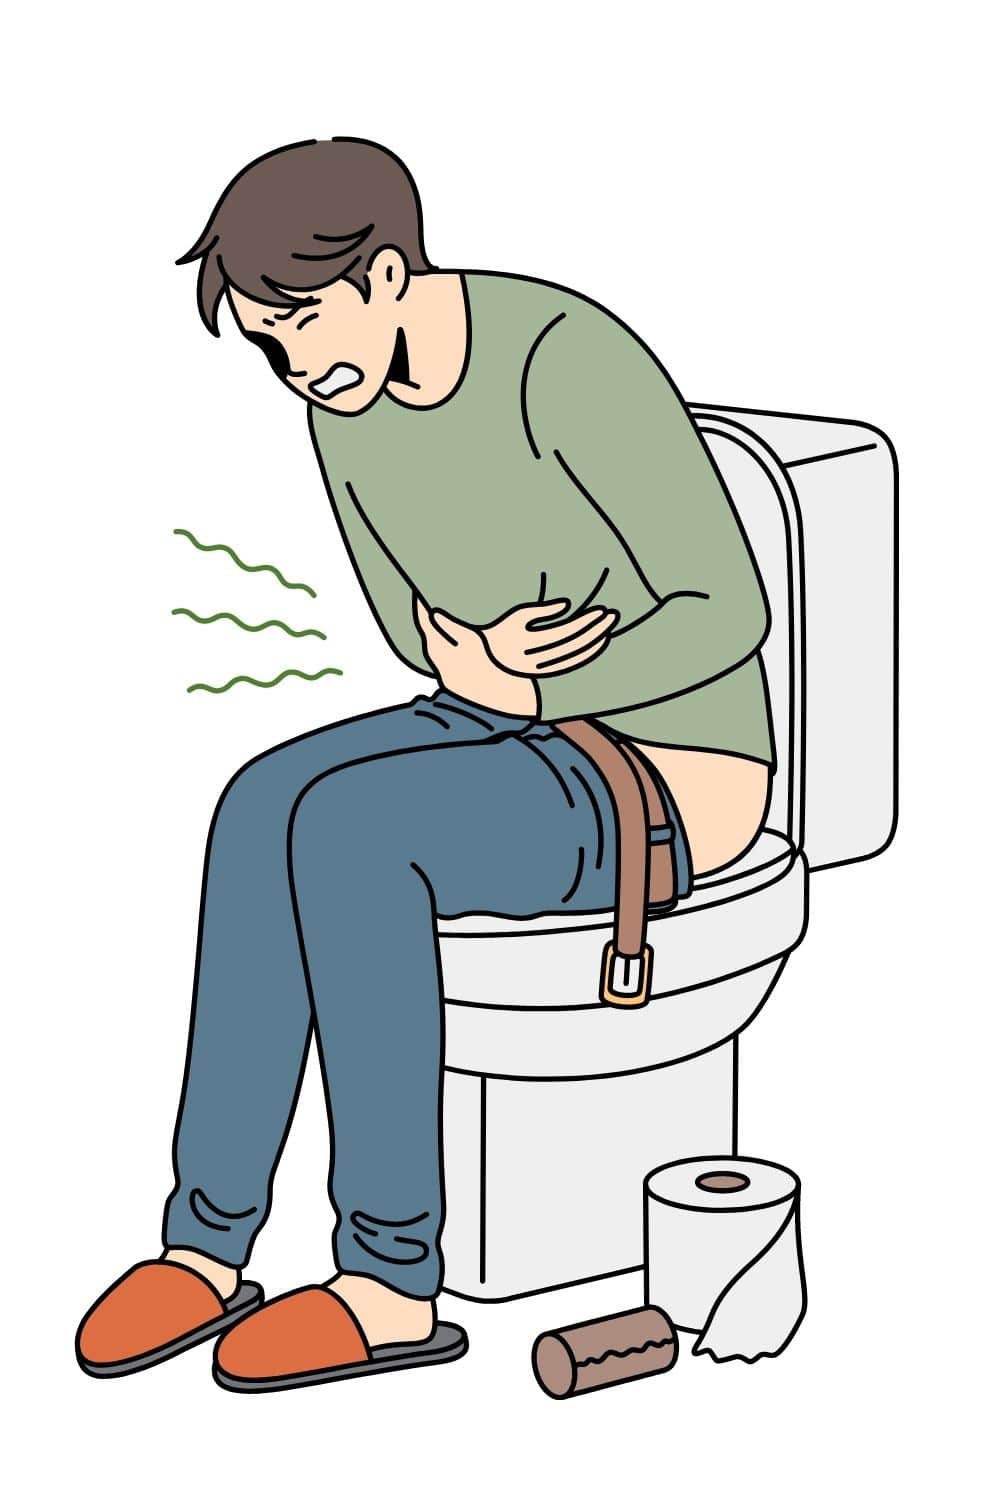 Tips For When You Finally Transition From Constipated To Staying Regular